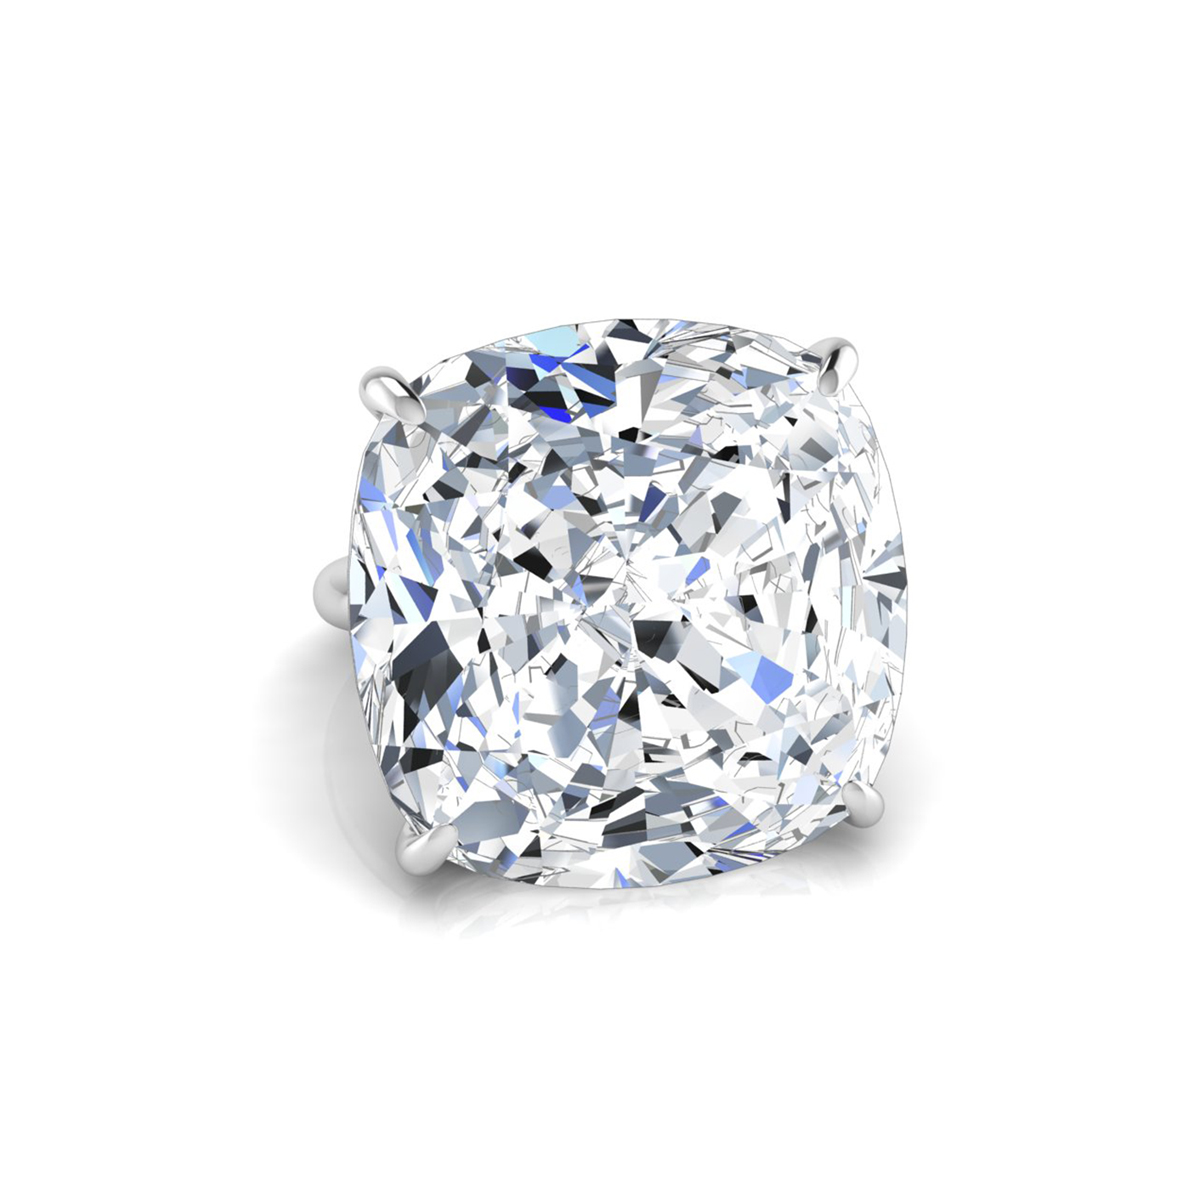 Huge Cushion CZ Stone Solitaire Cocktail Ring